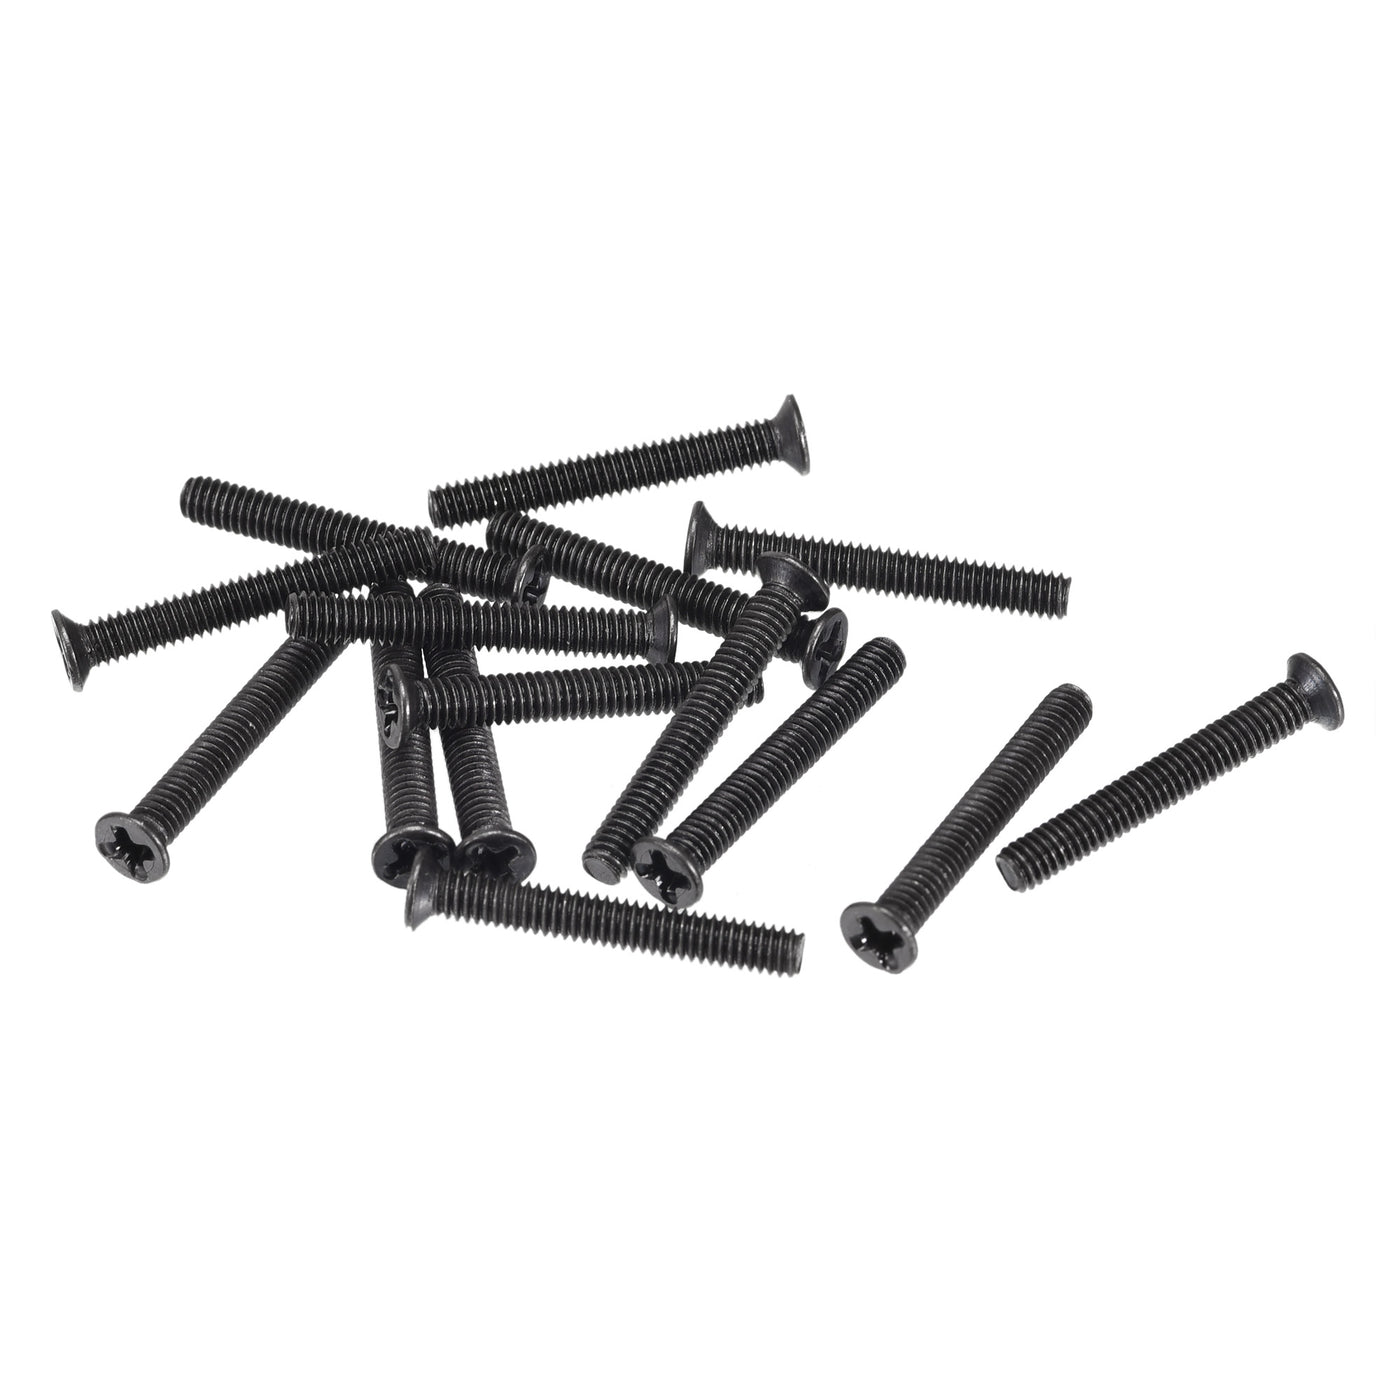 uxcell Uxcell M2.5 x 18mm Phillips Flat Head Screws Carbon Steel Machine Screws Black for Home Office Computer Case Appliance Equipment 350pcs